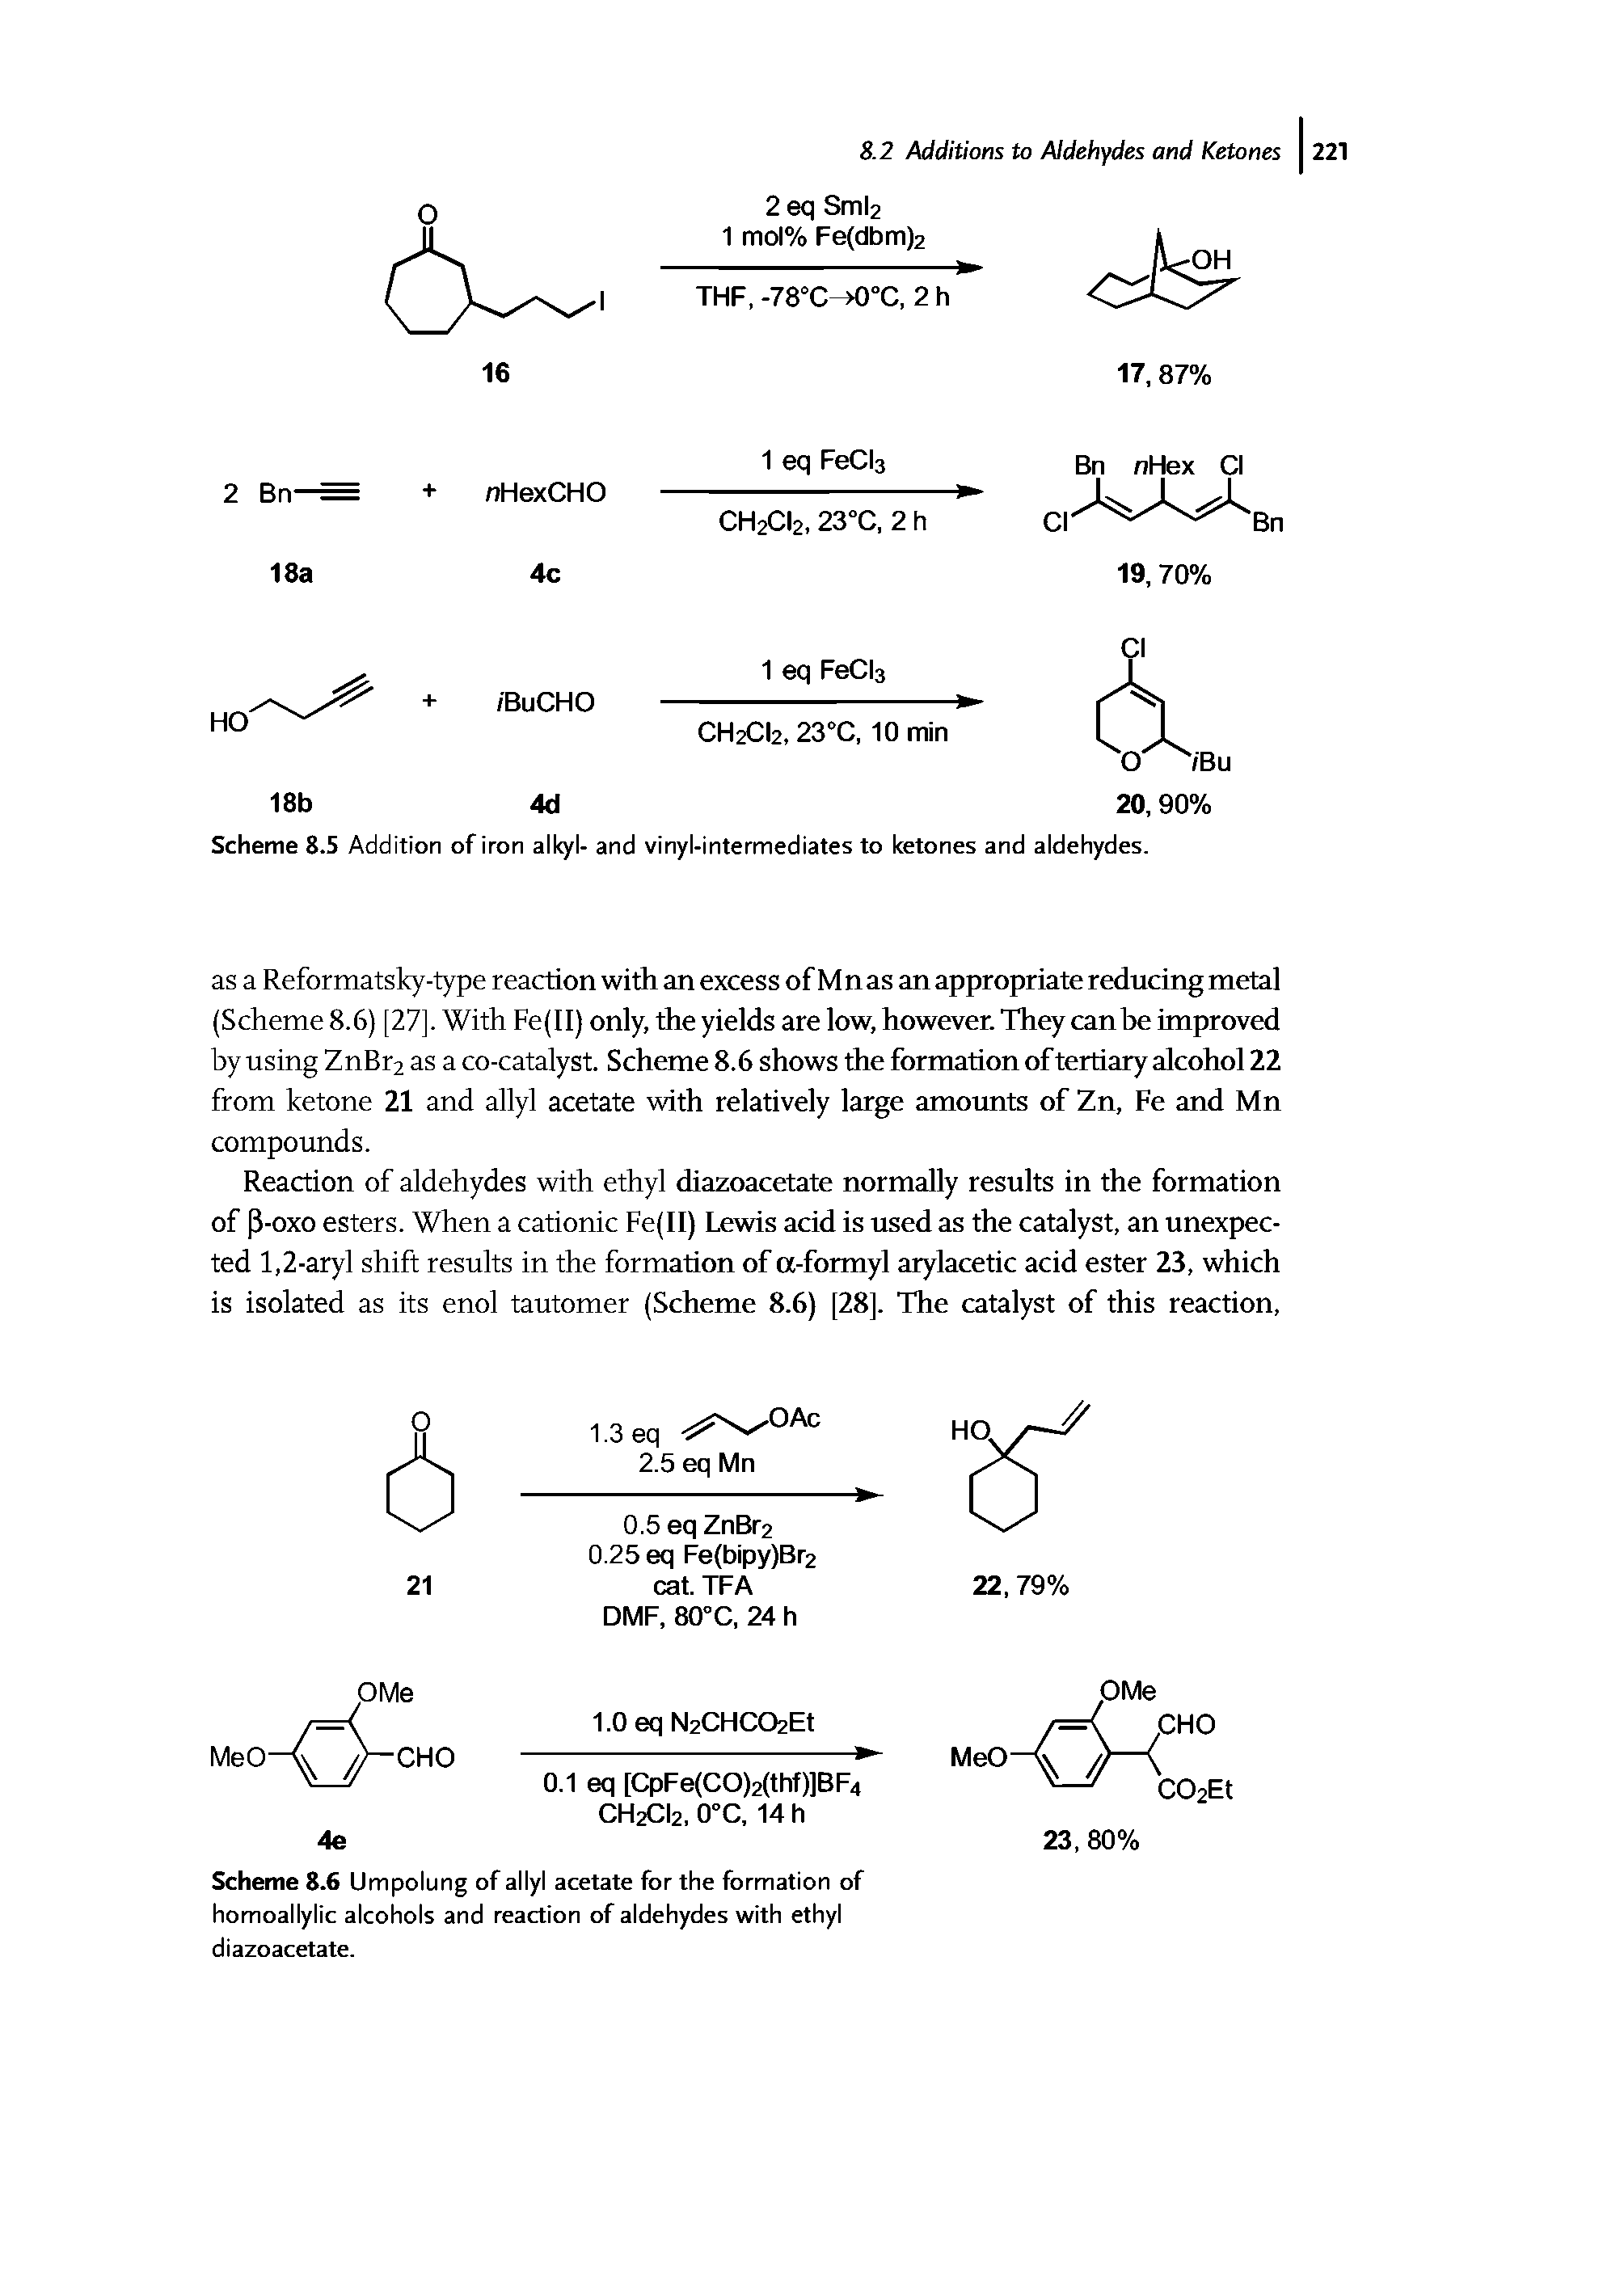 Scheme 8.6 Umpolung of allyl acetate for the formation of homoallylic alcohols and reaction of aldehydes with ethyl diazoacetate.